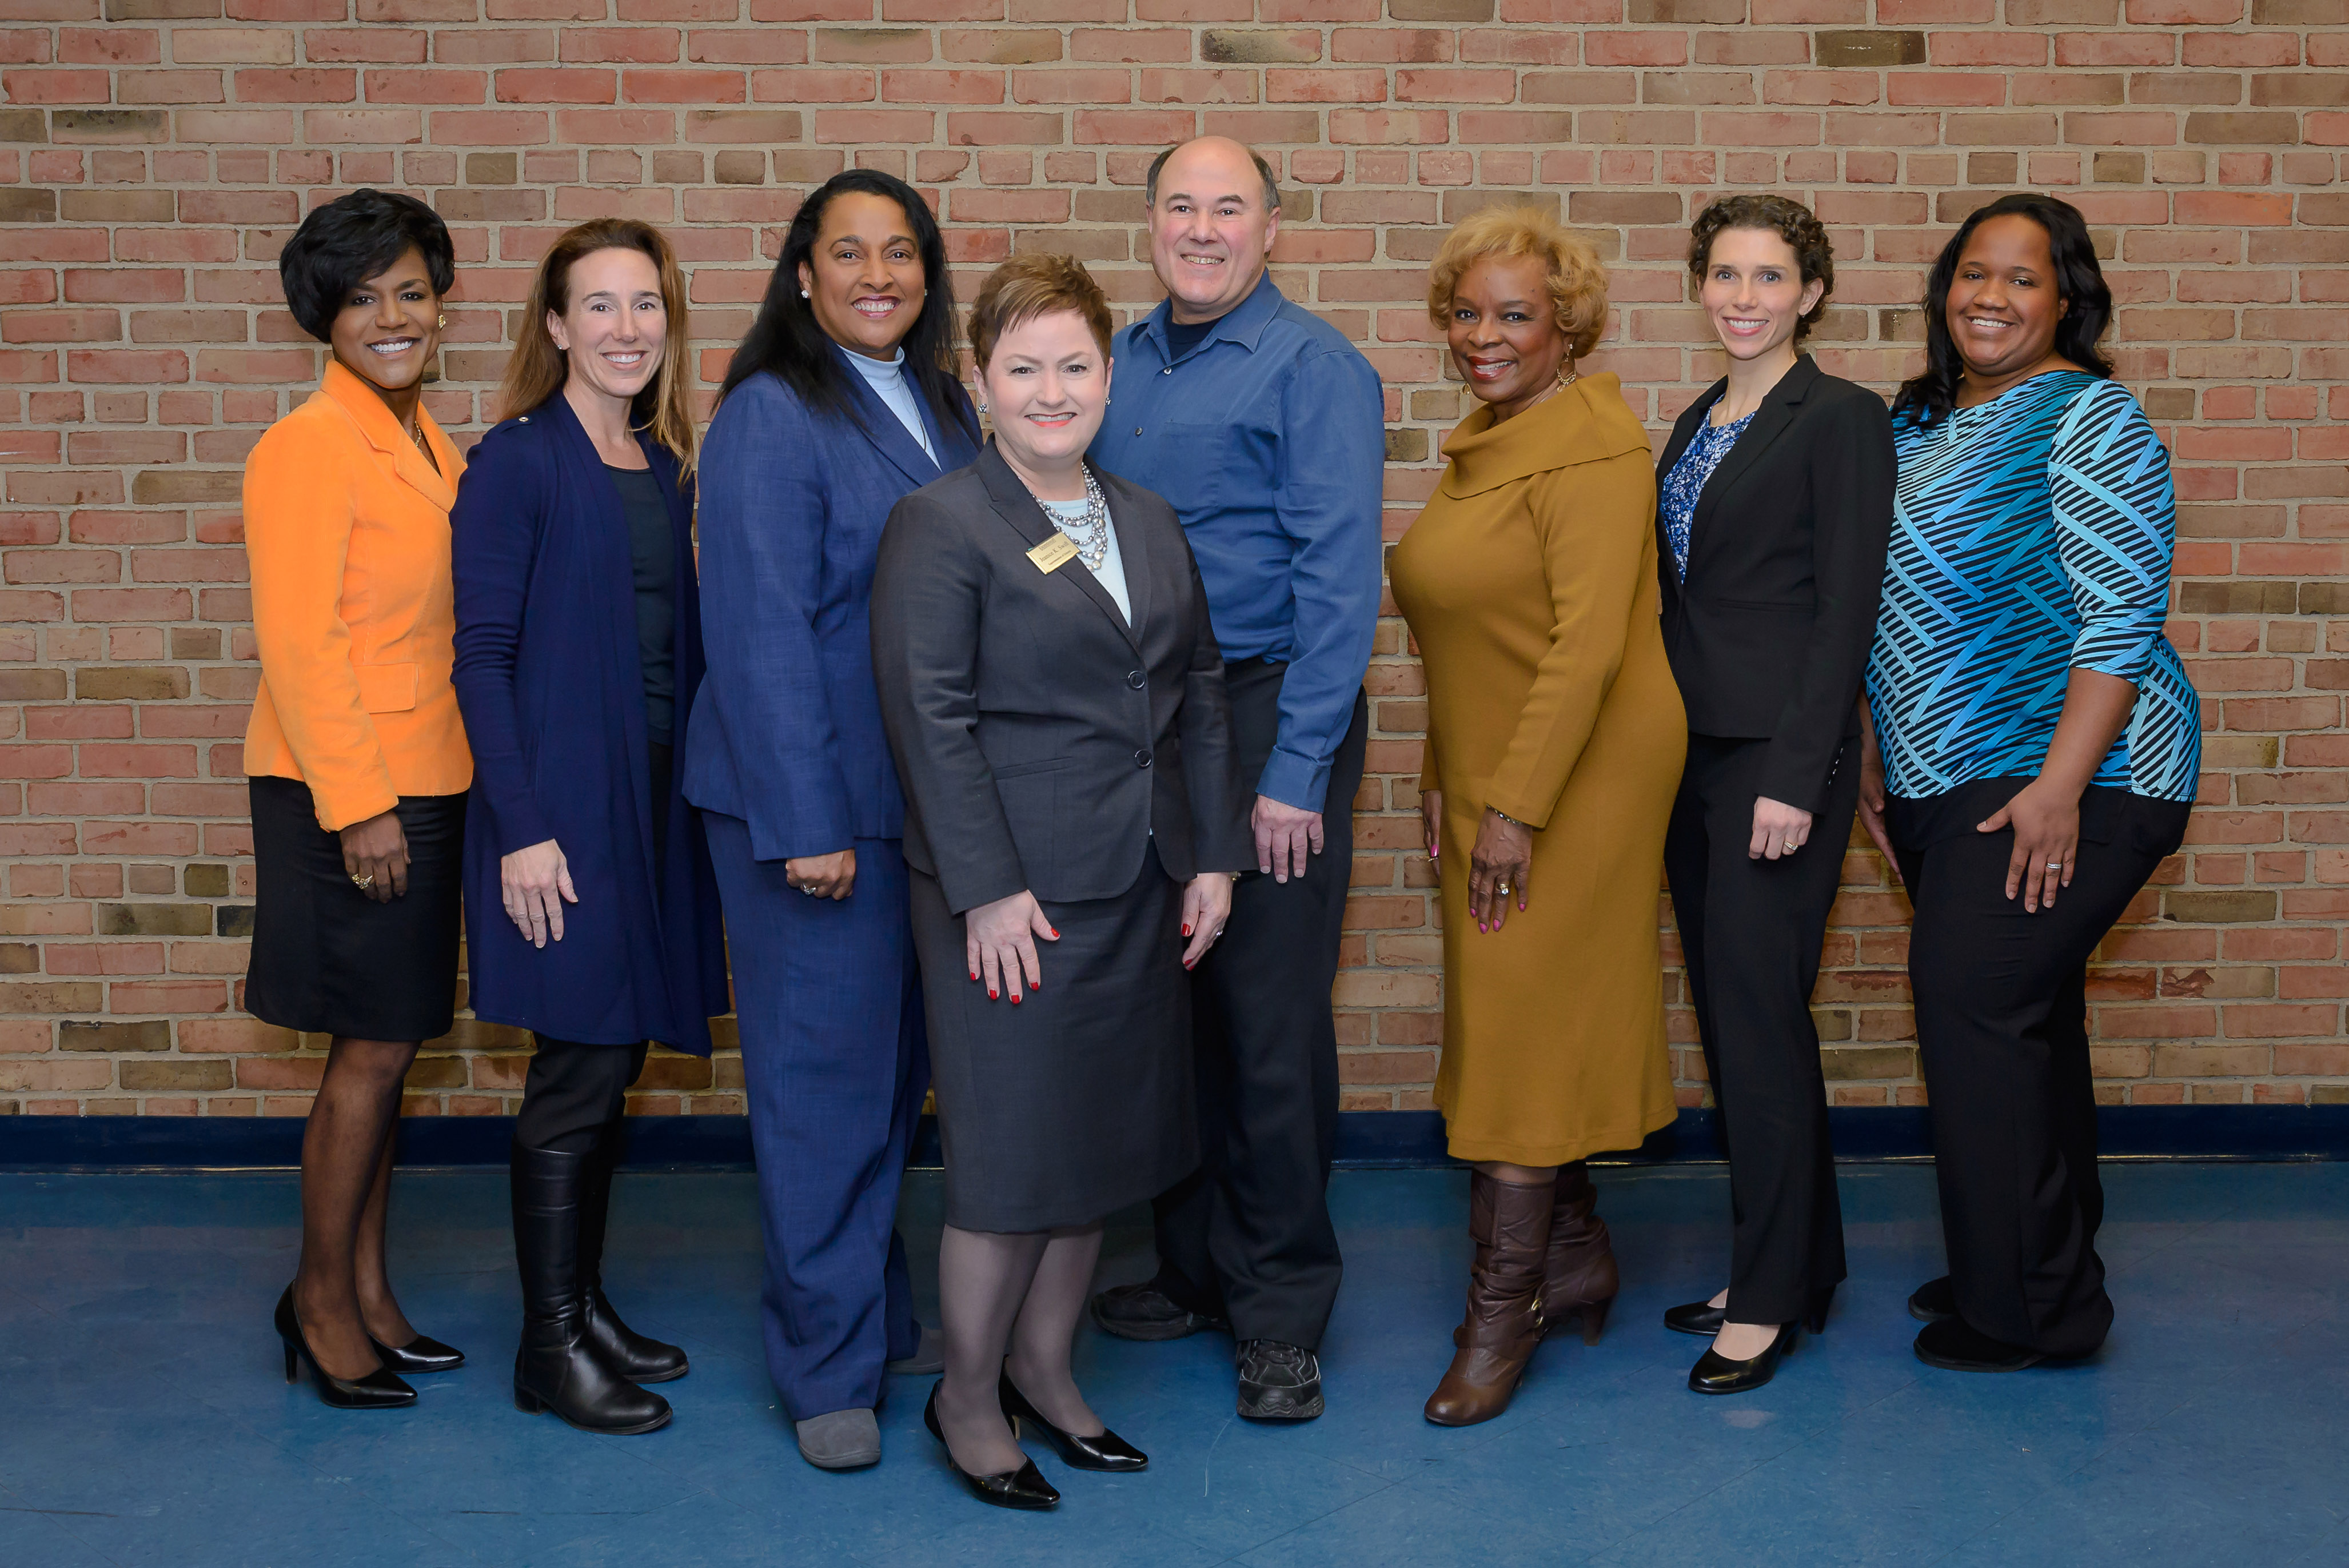 The seven members of the AAPS Board of Education and Superintendent Jeanice Swift stand in front of a brick wall.